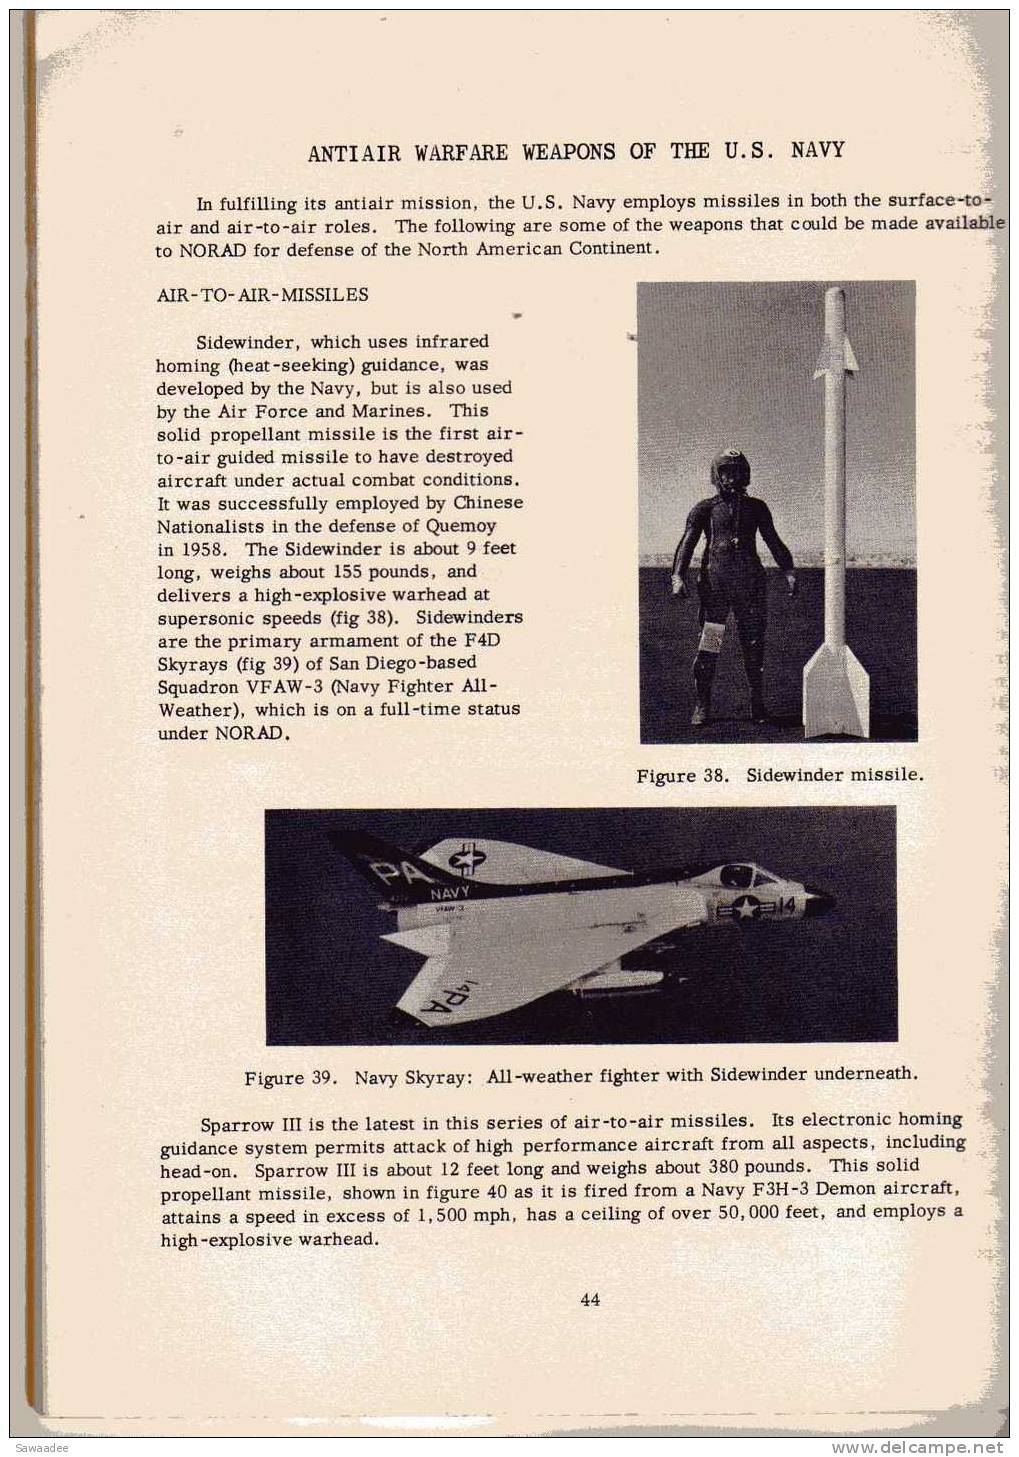 DOCUMENT - MILITARIA  - U.S. ARMY AIR DEFENSE -  FORT BLISS - TEXAS - 1962/63 - 78 PAGES - NBRES ILLUSTRATIONS, PHOTOS - Oorlogen-deelname VS